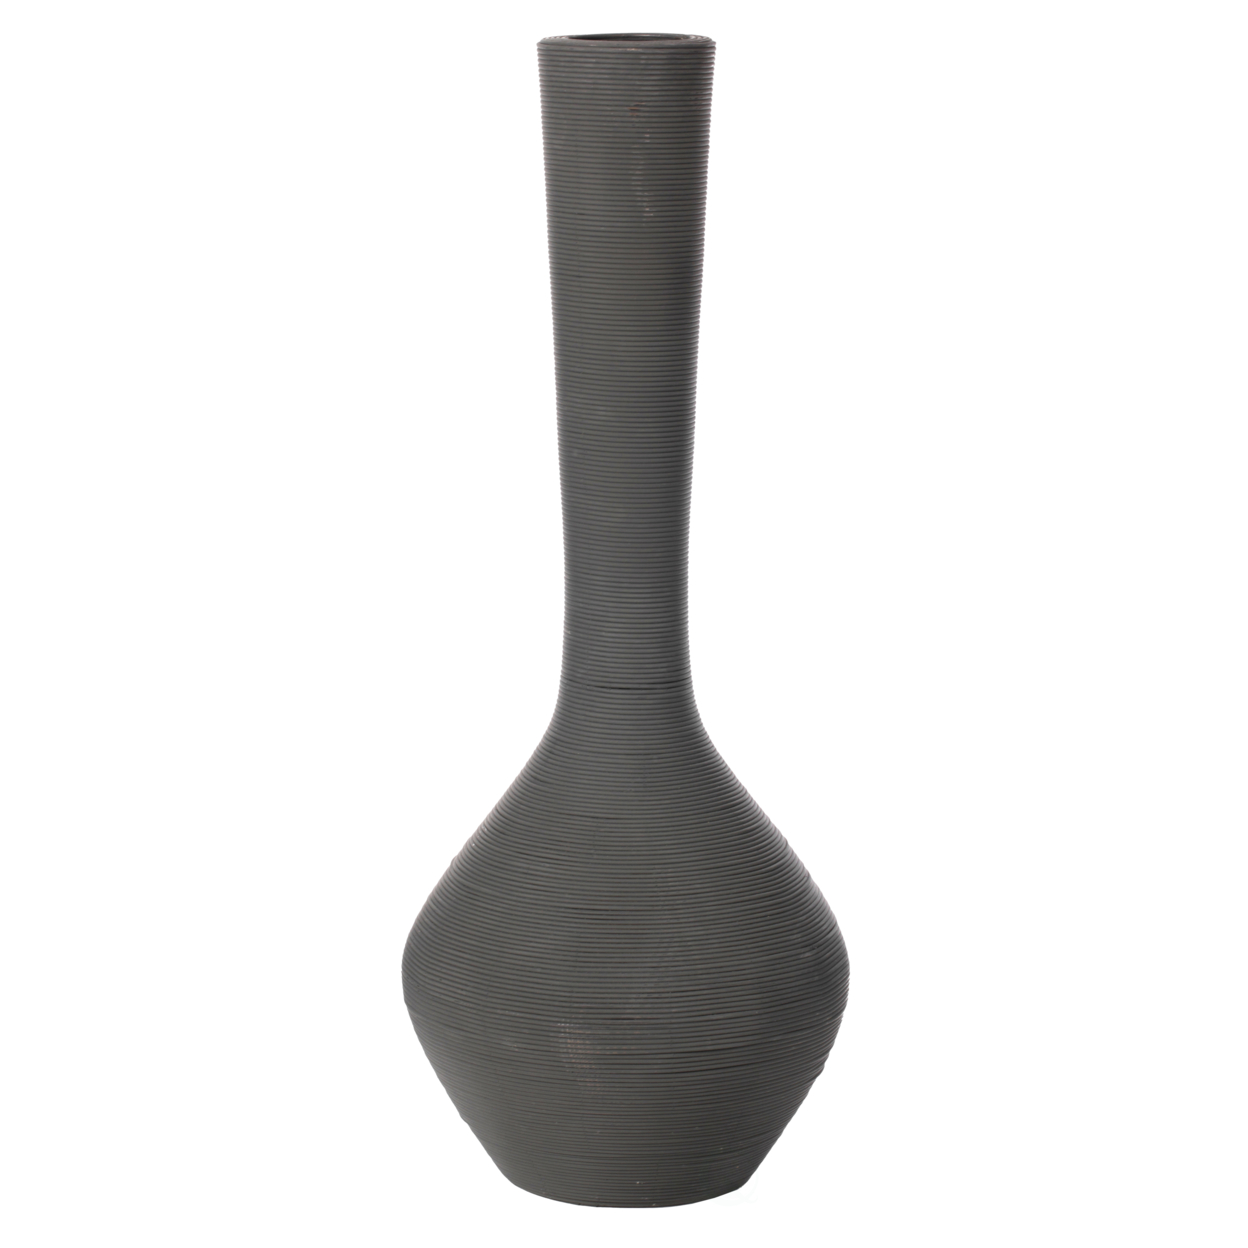 Uniquewise Tall Floor Vase, Modern Charcoal Grey Extra Large Floor